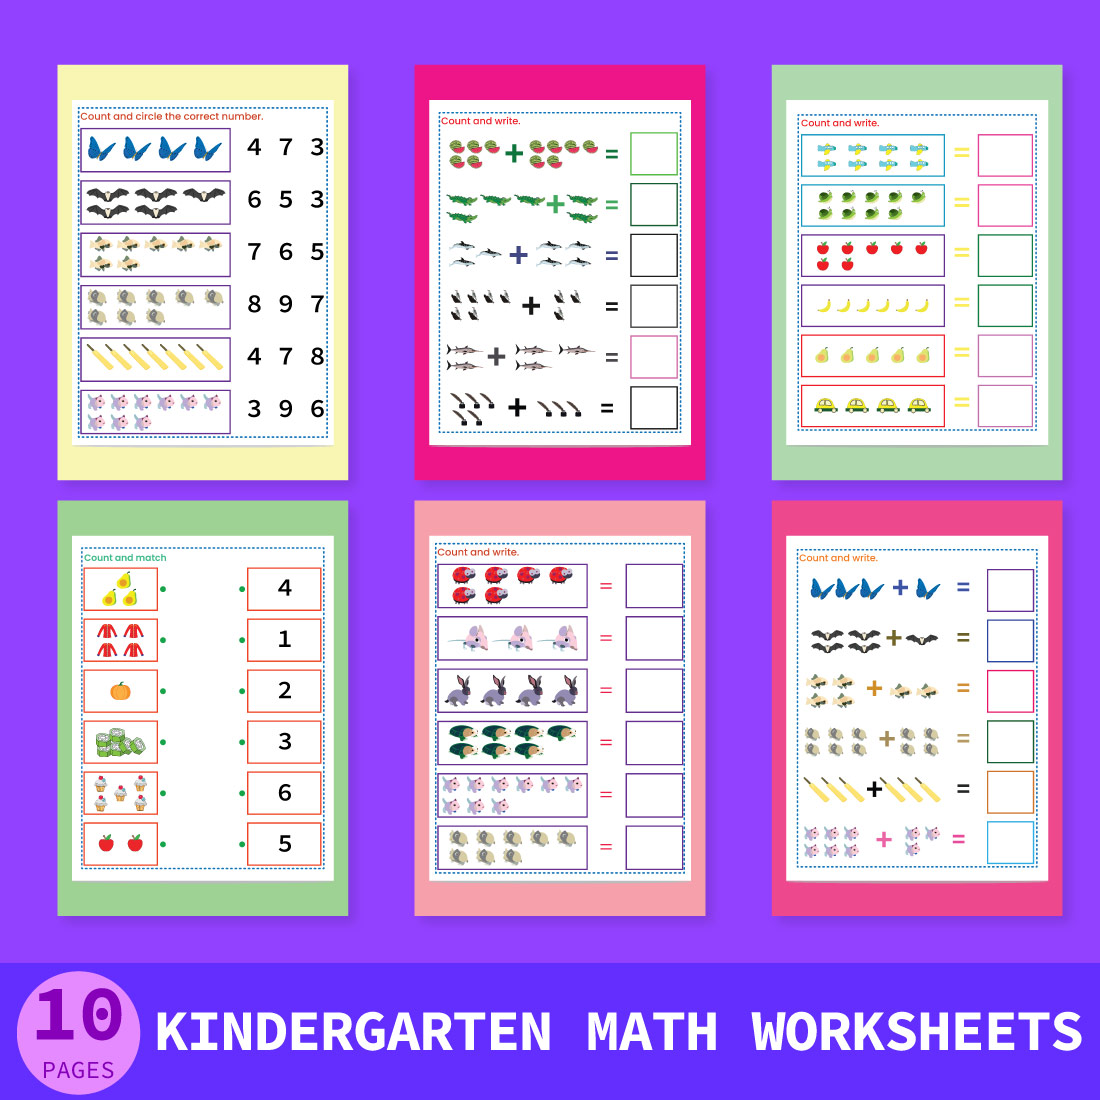 Kindergarten math Worksheets counting, matching and addition cover image.